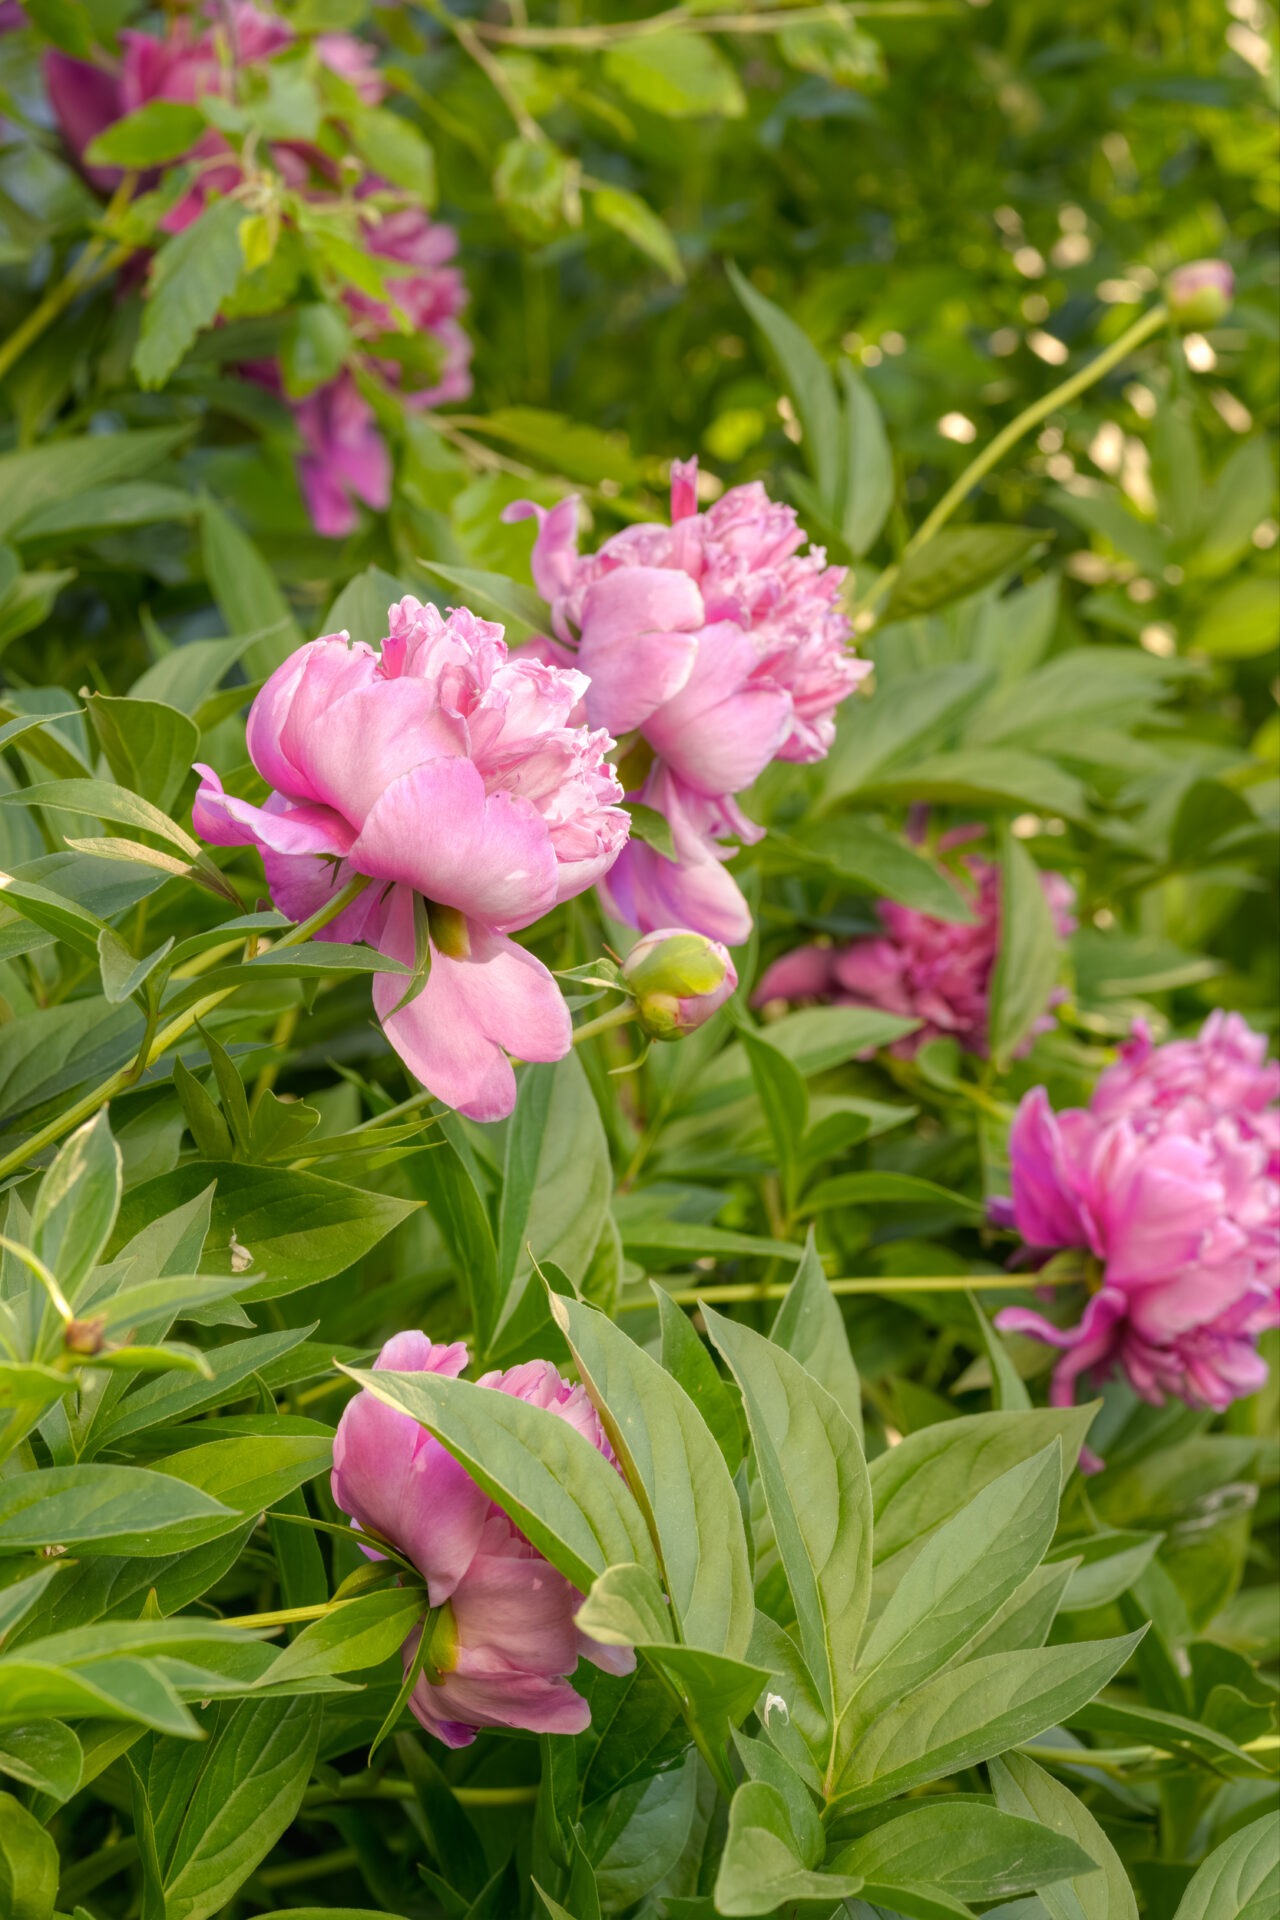 A vibrant cluster of pink peonies in full bloom, surrounded by lush green foliage, in a sunlit garden setting.